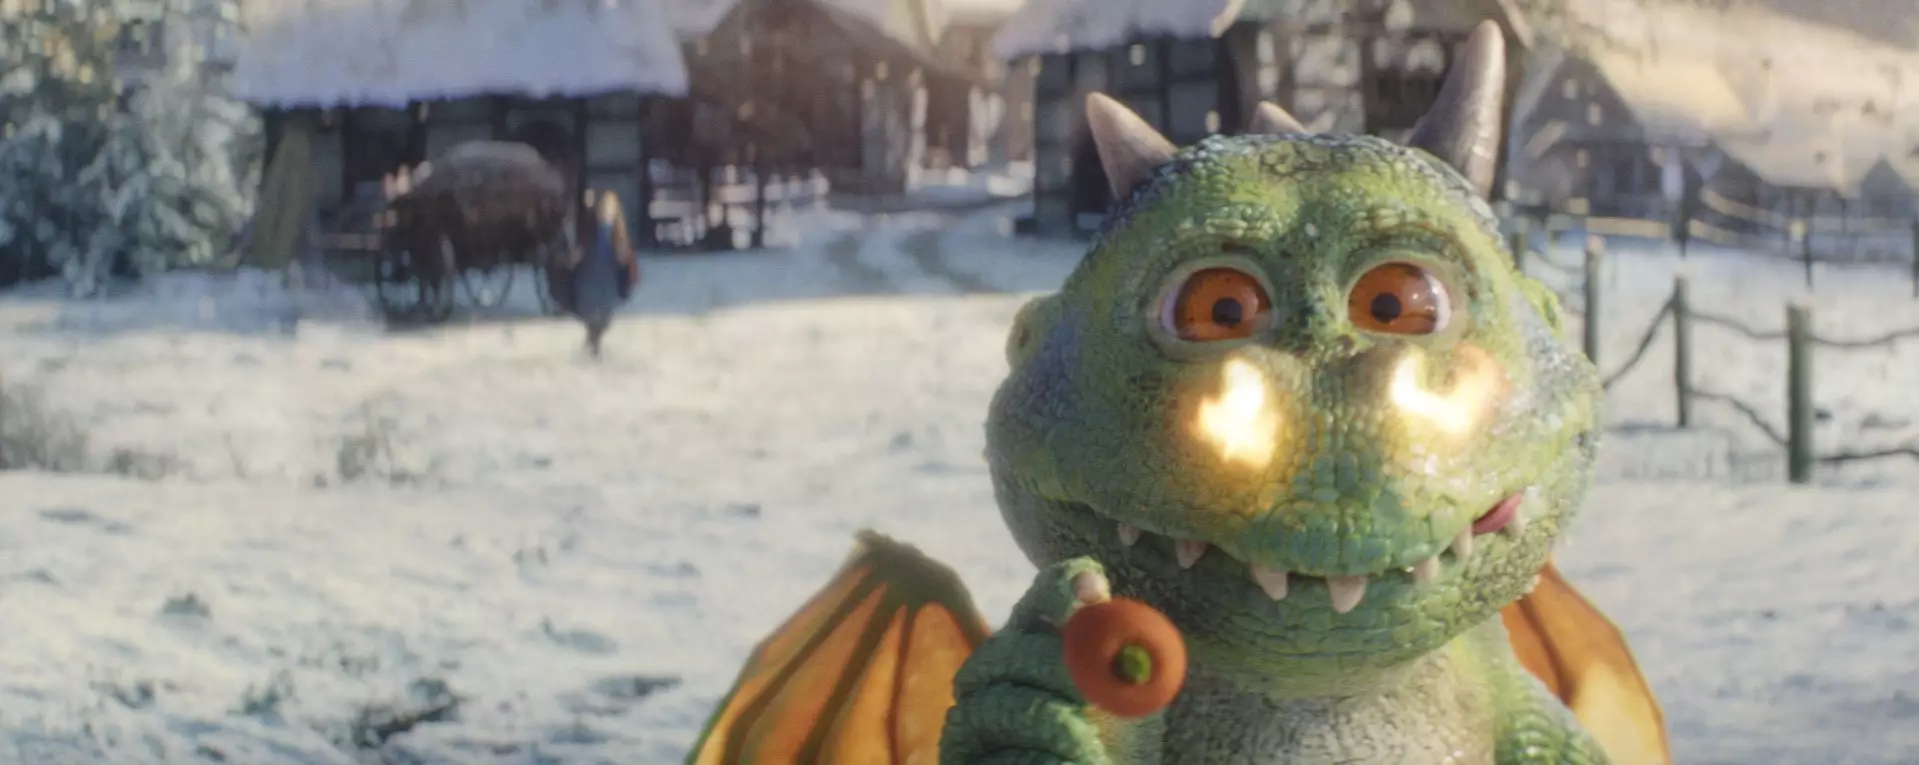 John Lewis had to apologise for making children cry at its latest Christmas ad.